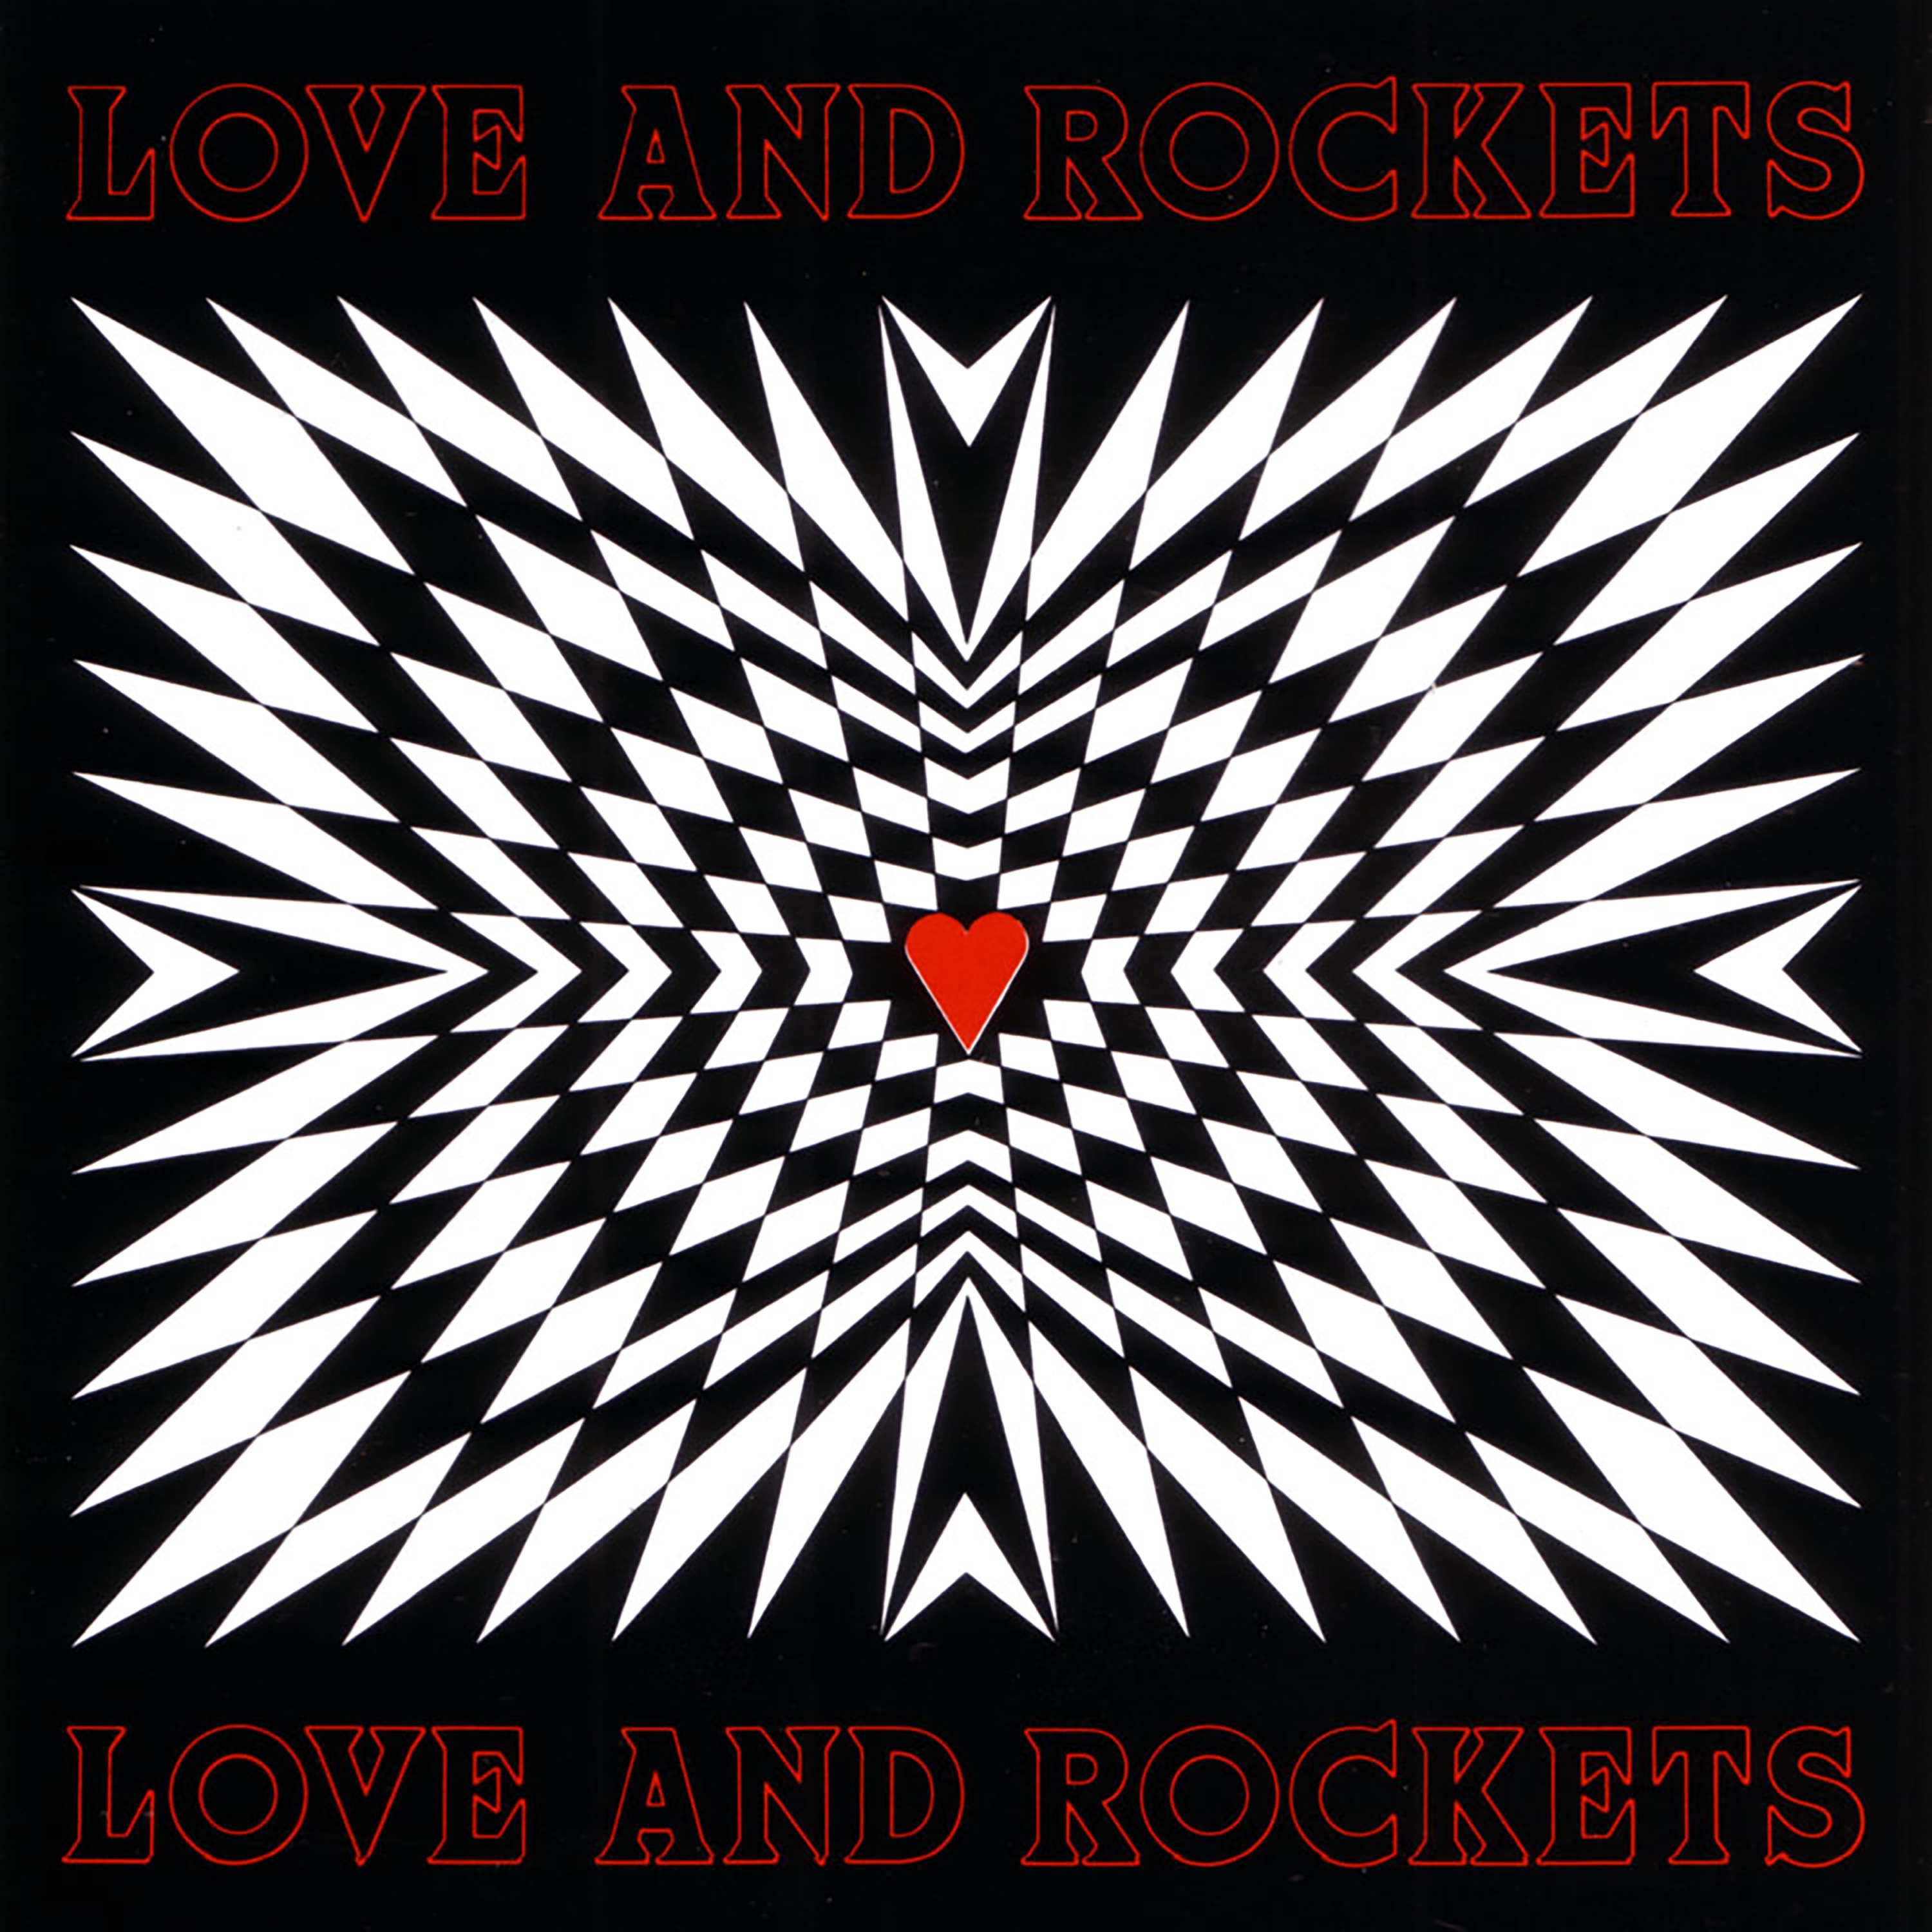 Love and Rockets - Love and Rockets (Re-issue)